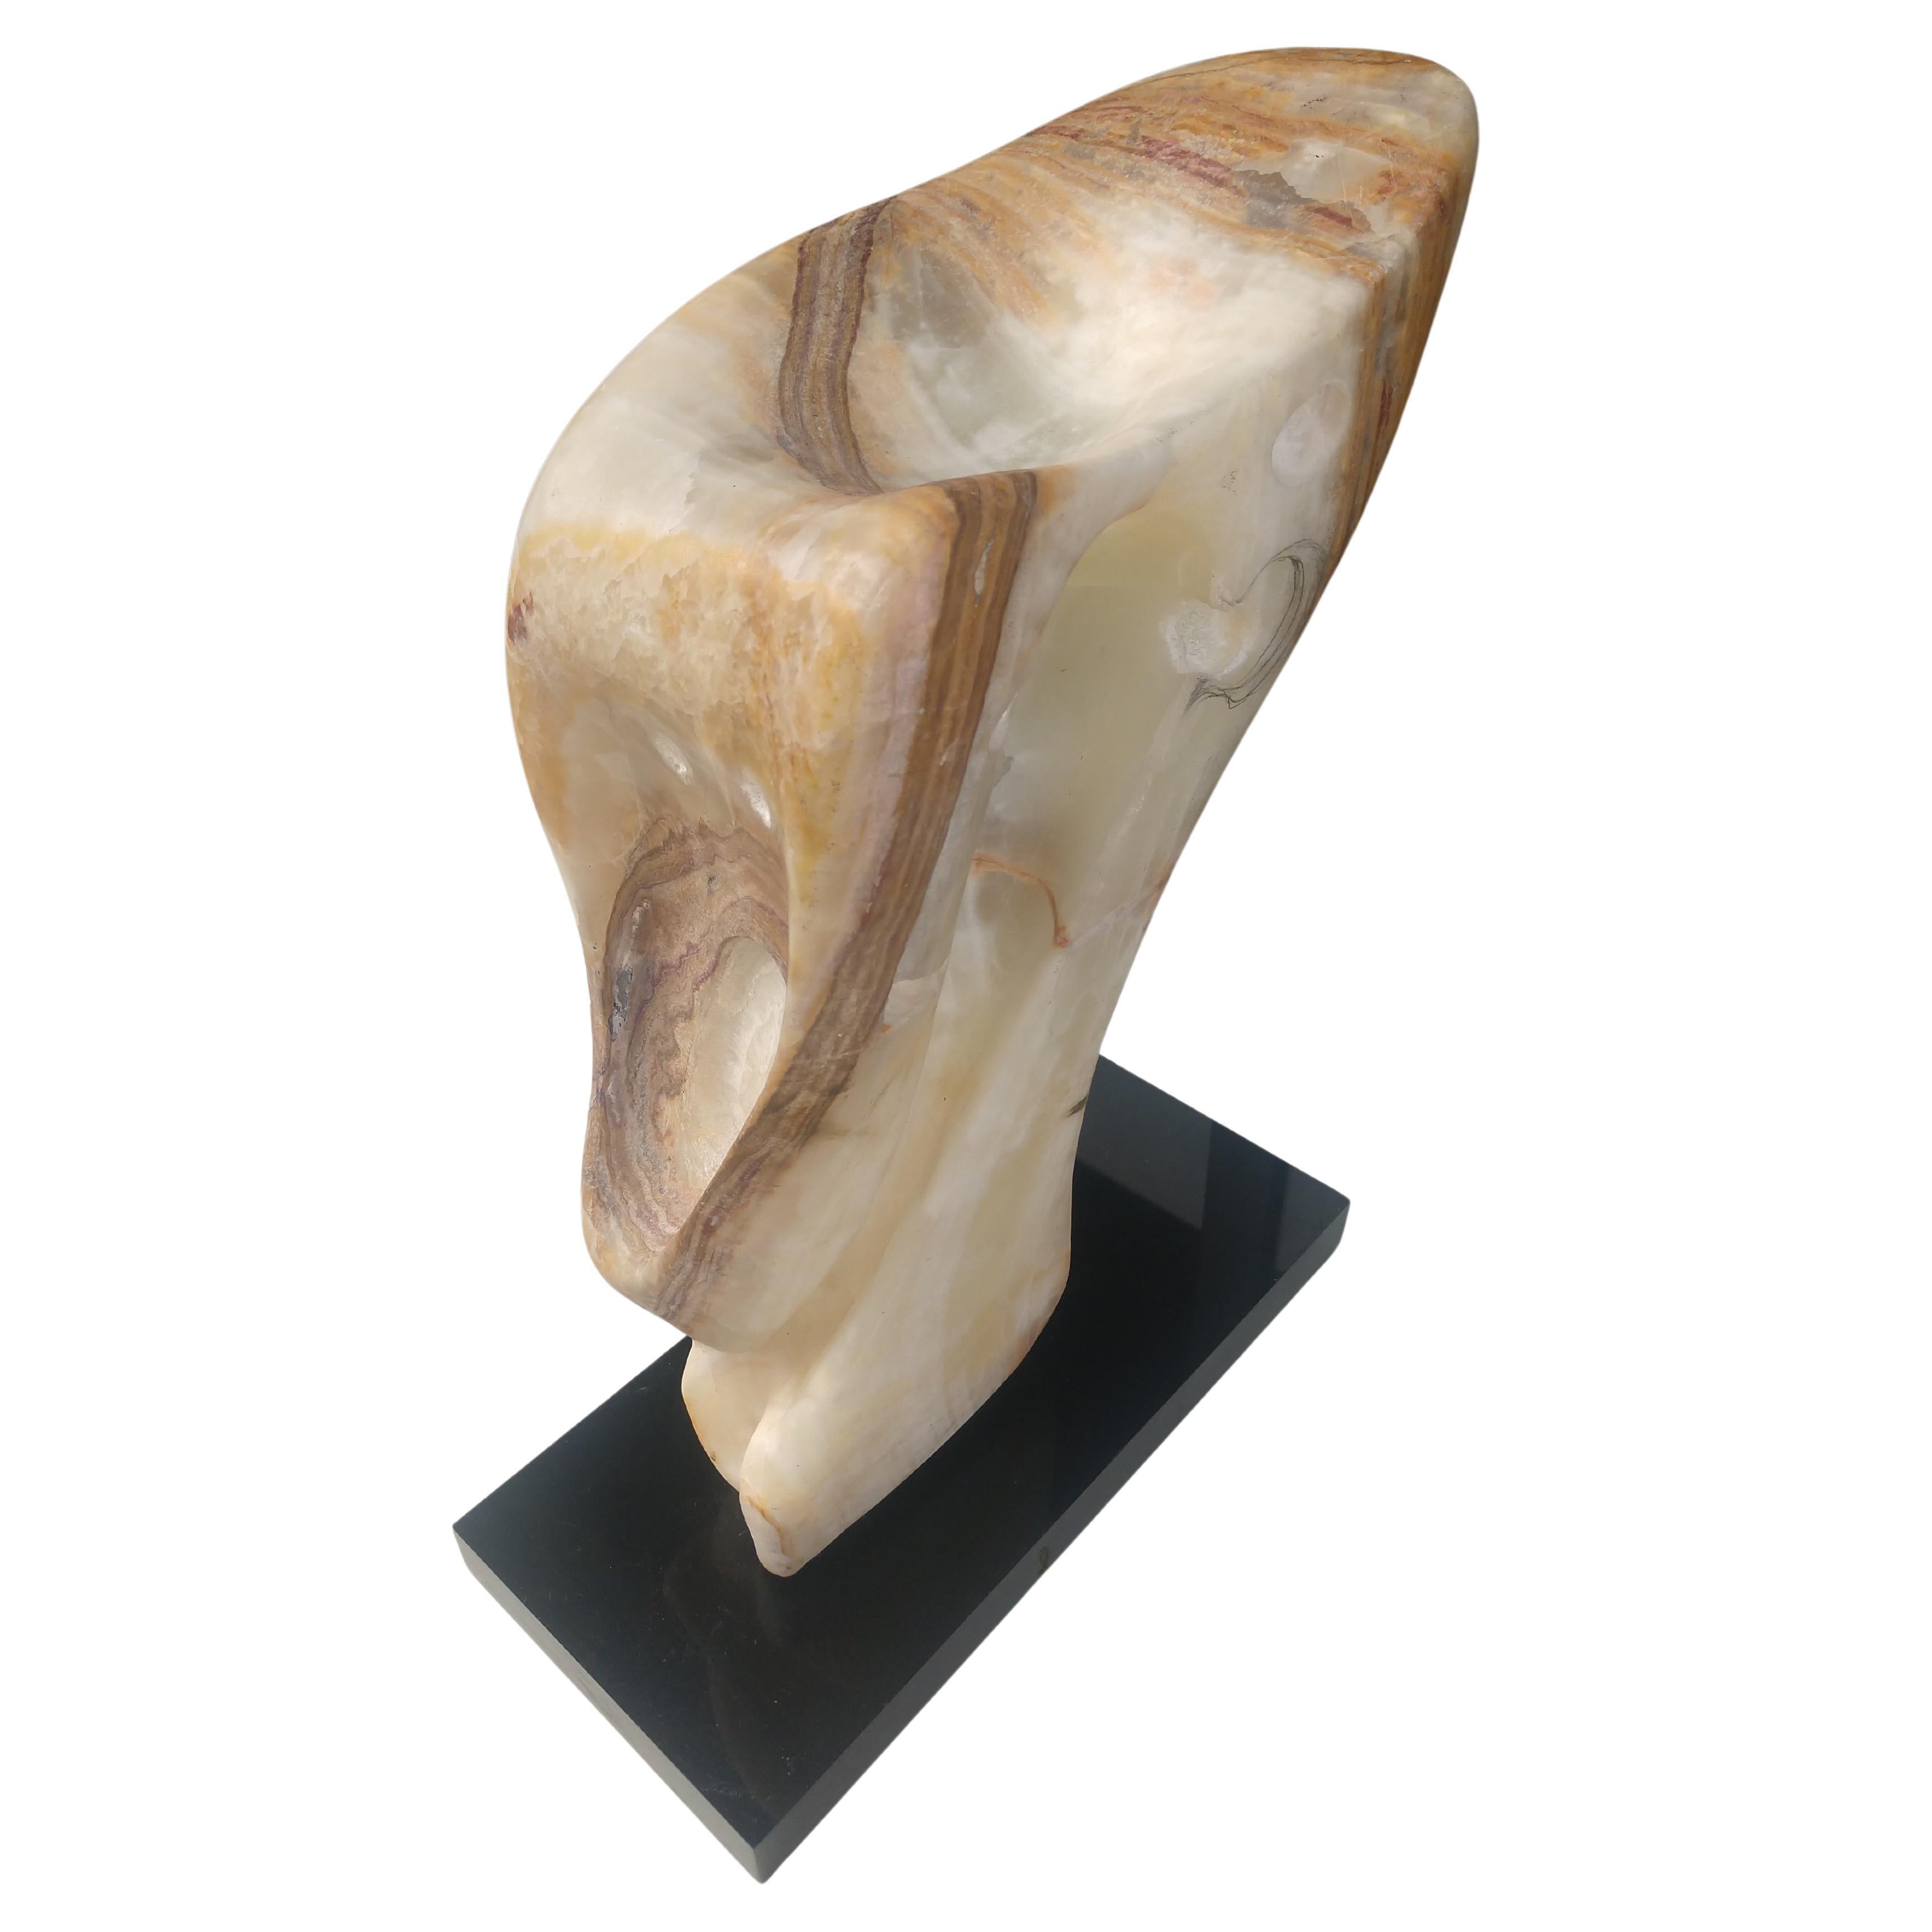 Abstract Carved Stone by Outsider Artist Louise Abrams